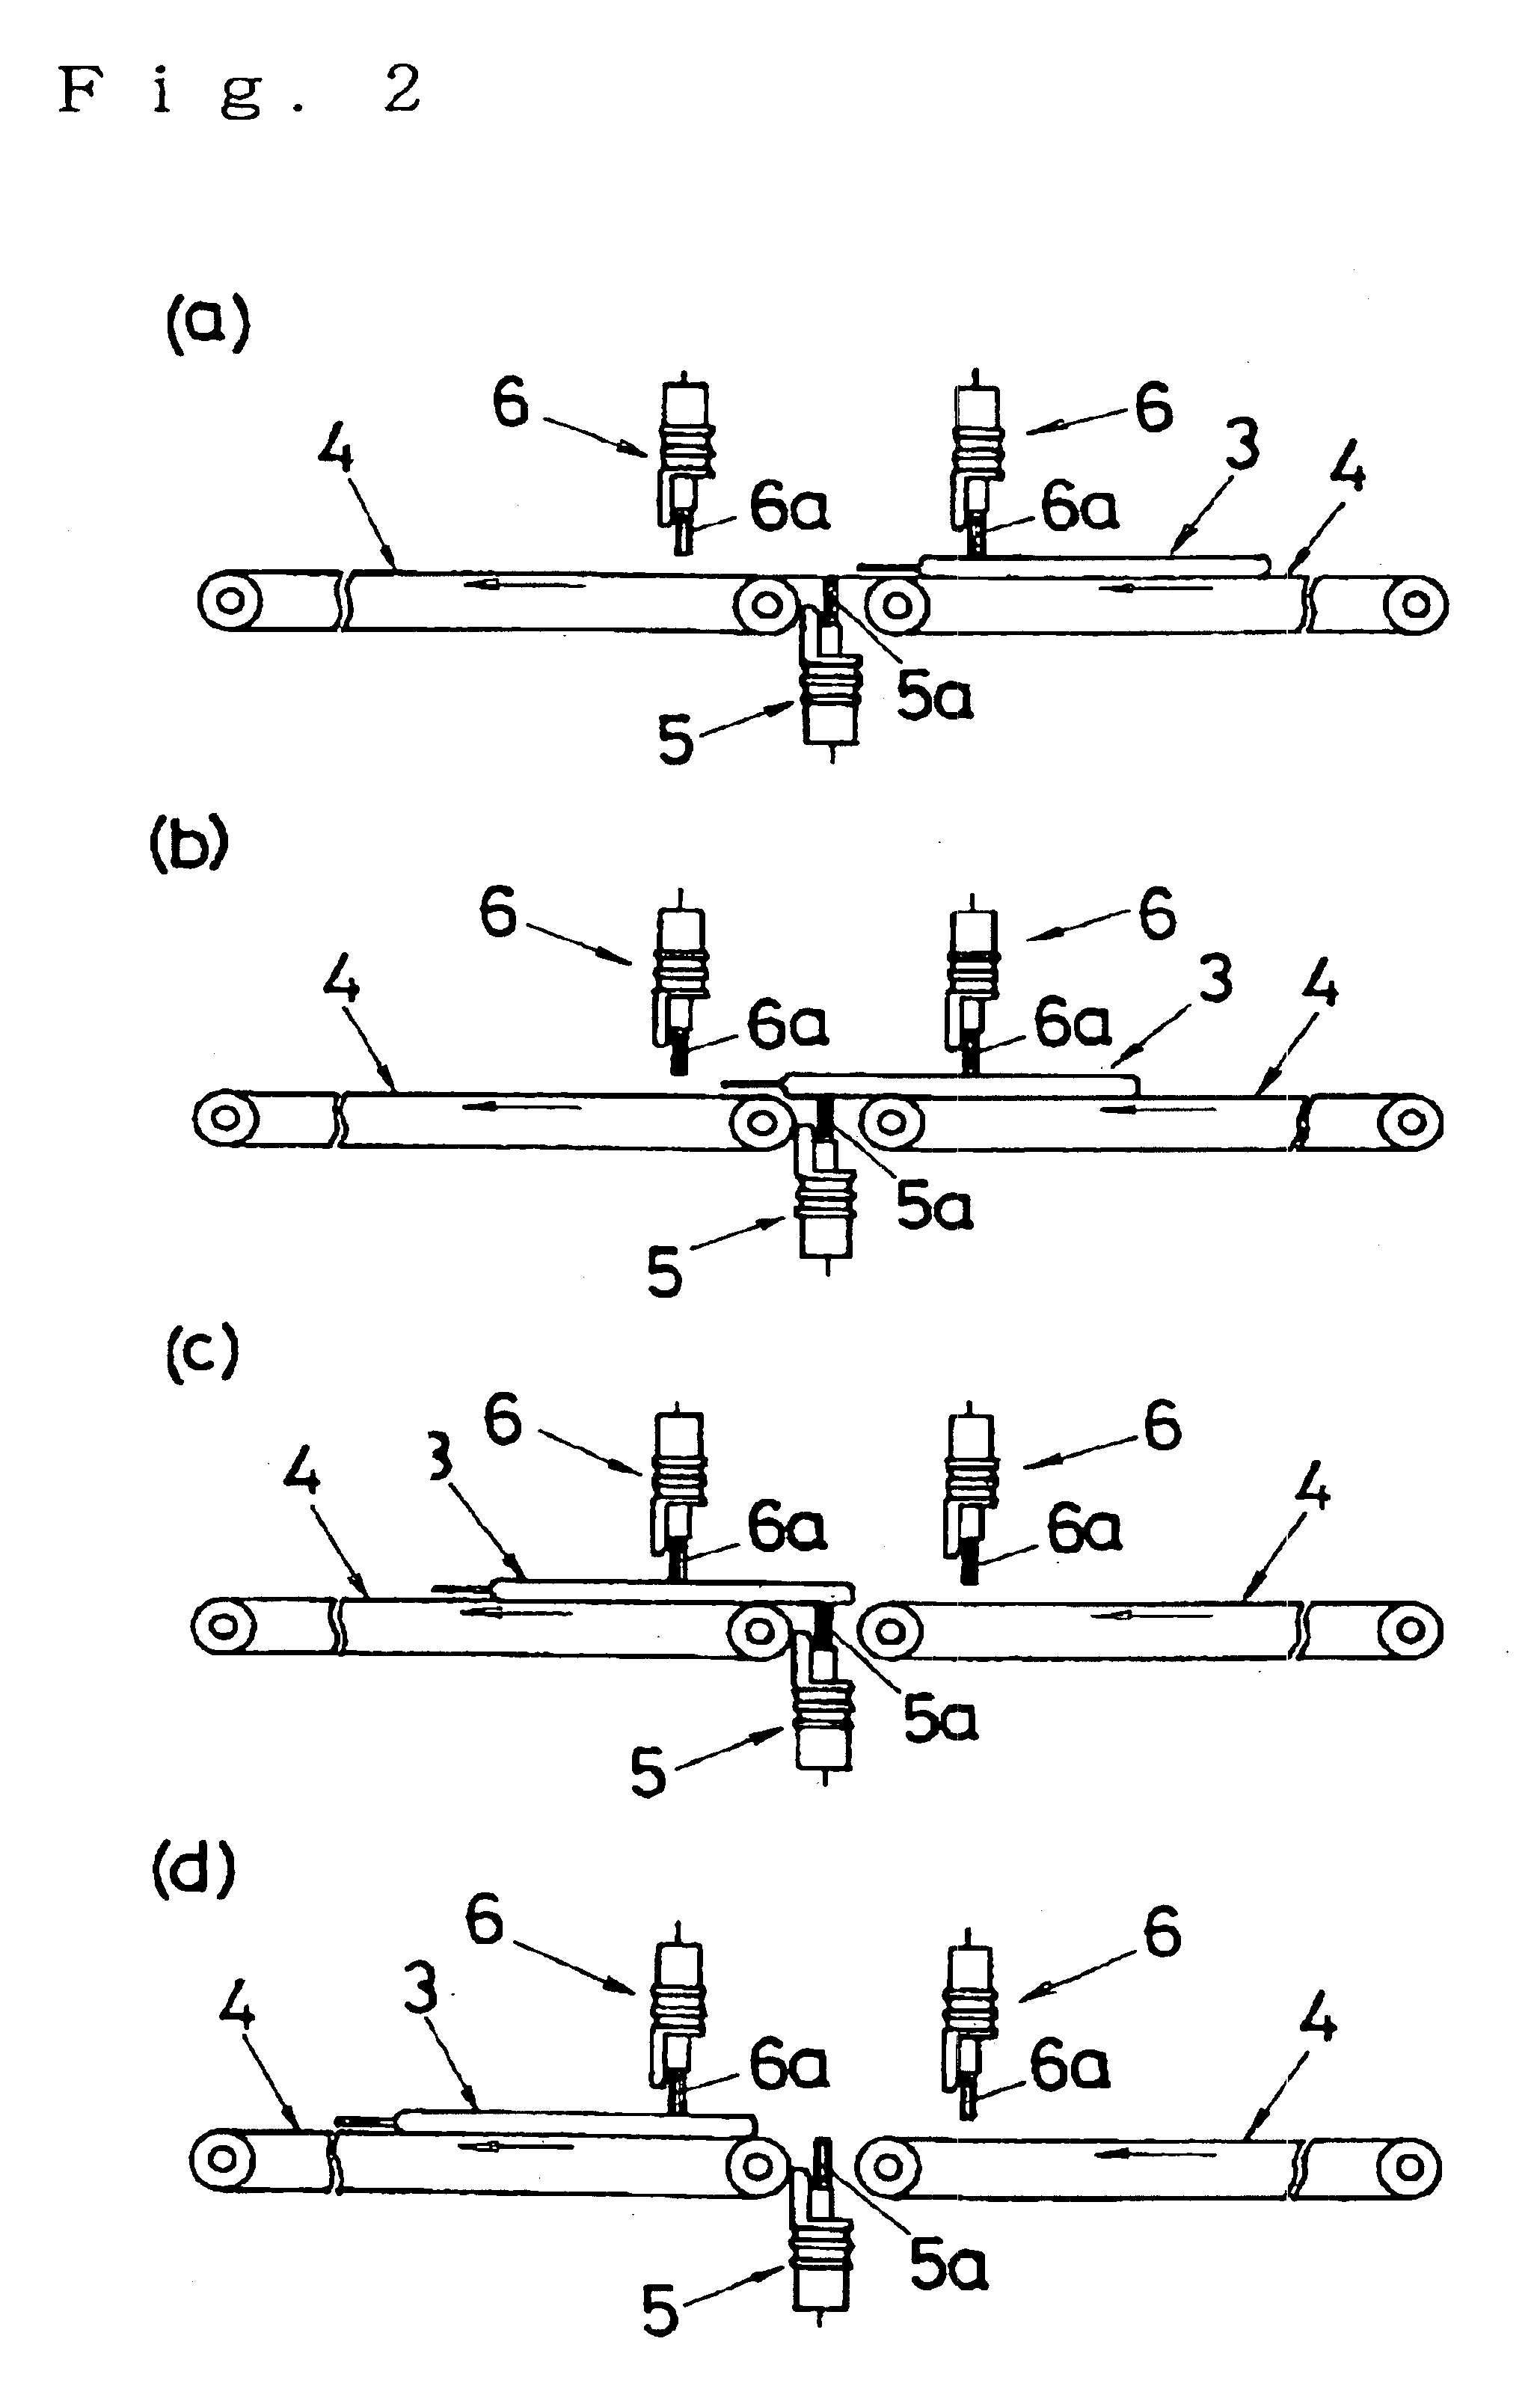 Device for inspecting hermetically sealed packages